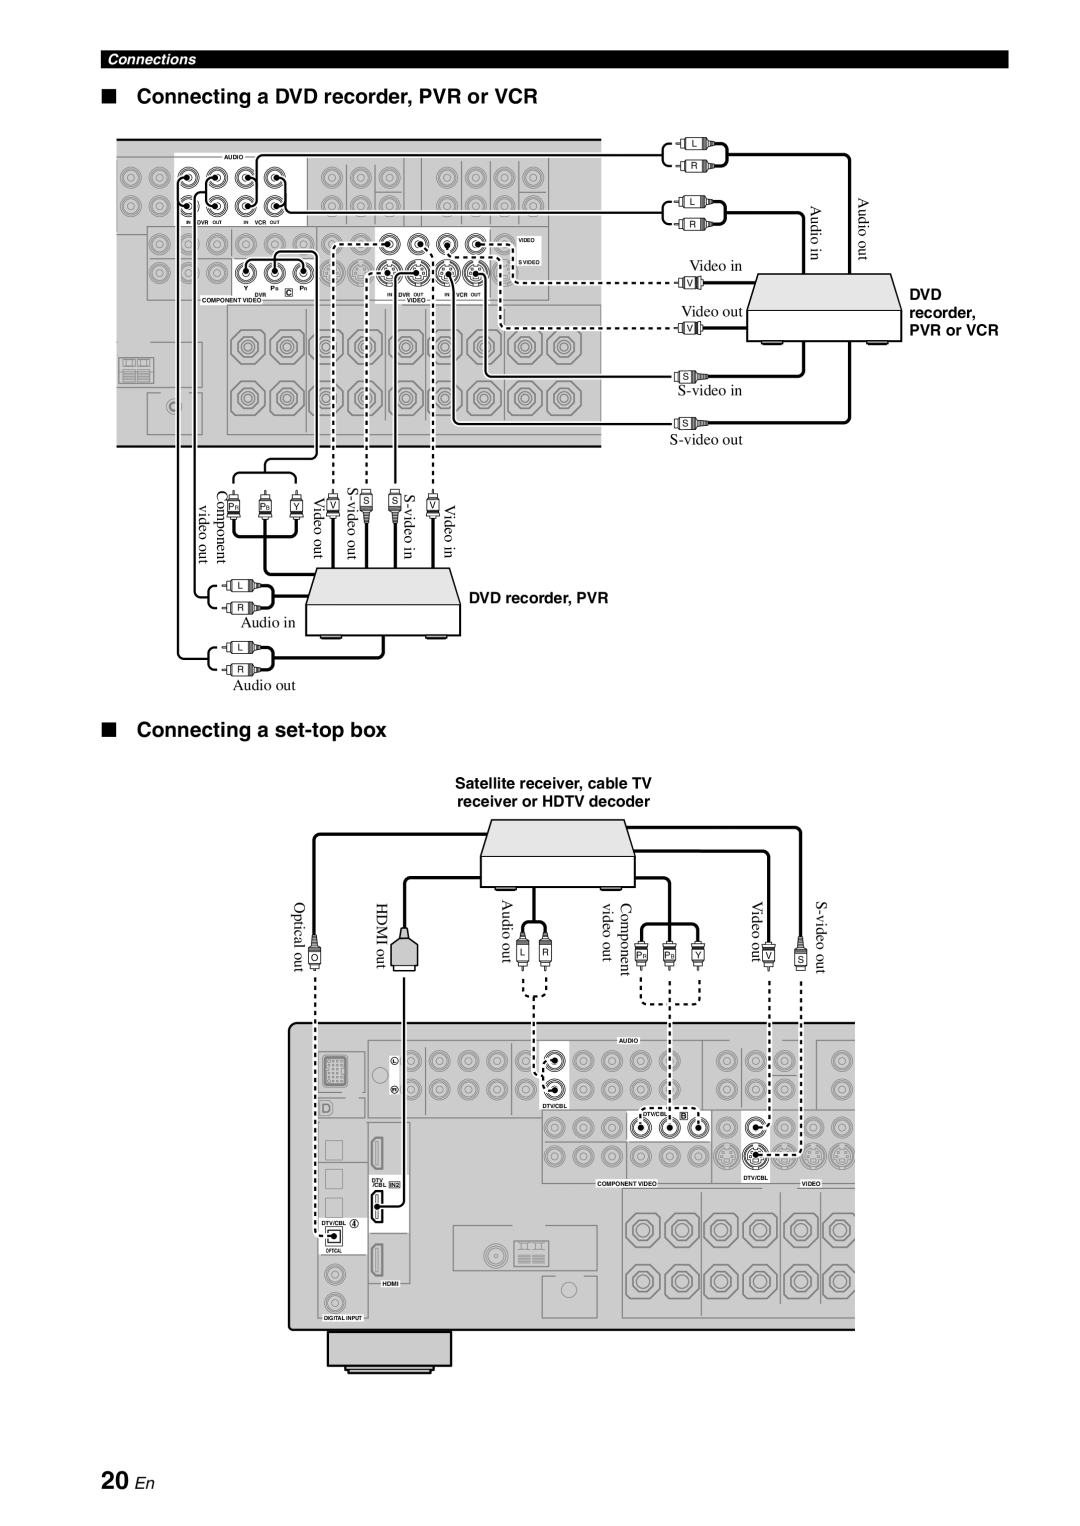 Yamaha HTR-6080 owner manual 20 En, Connecting a DVD recorder, PVR or VCR, Connecting a set-topbox, Connections 